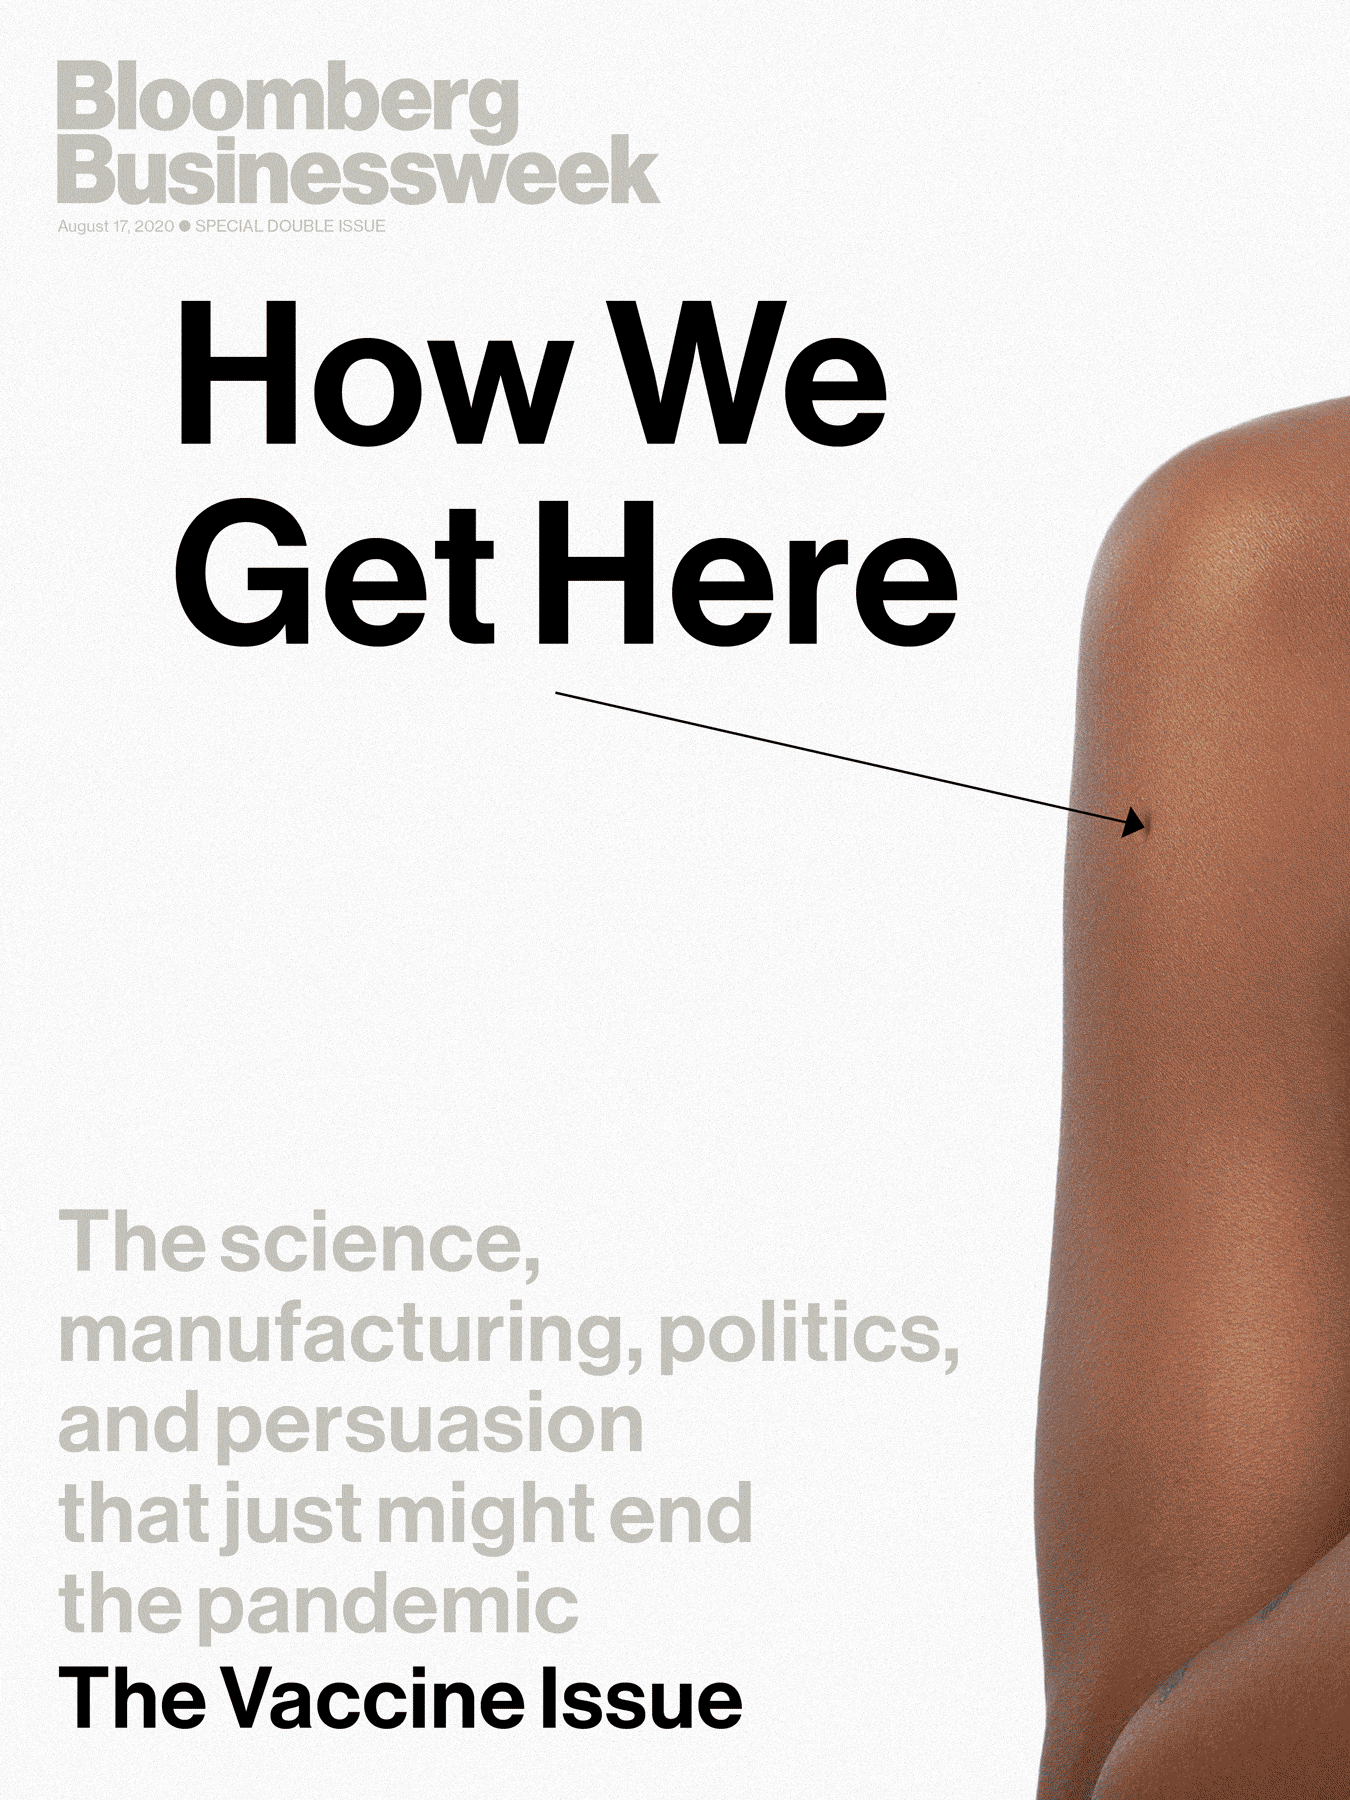 Bloomberg Businessweek cover image for issue dated Aug. 17, 2020. 